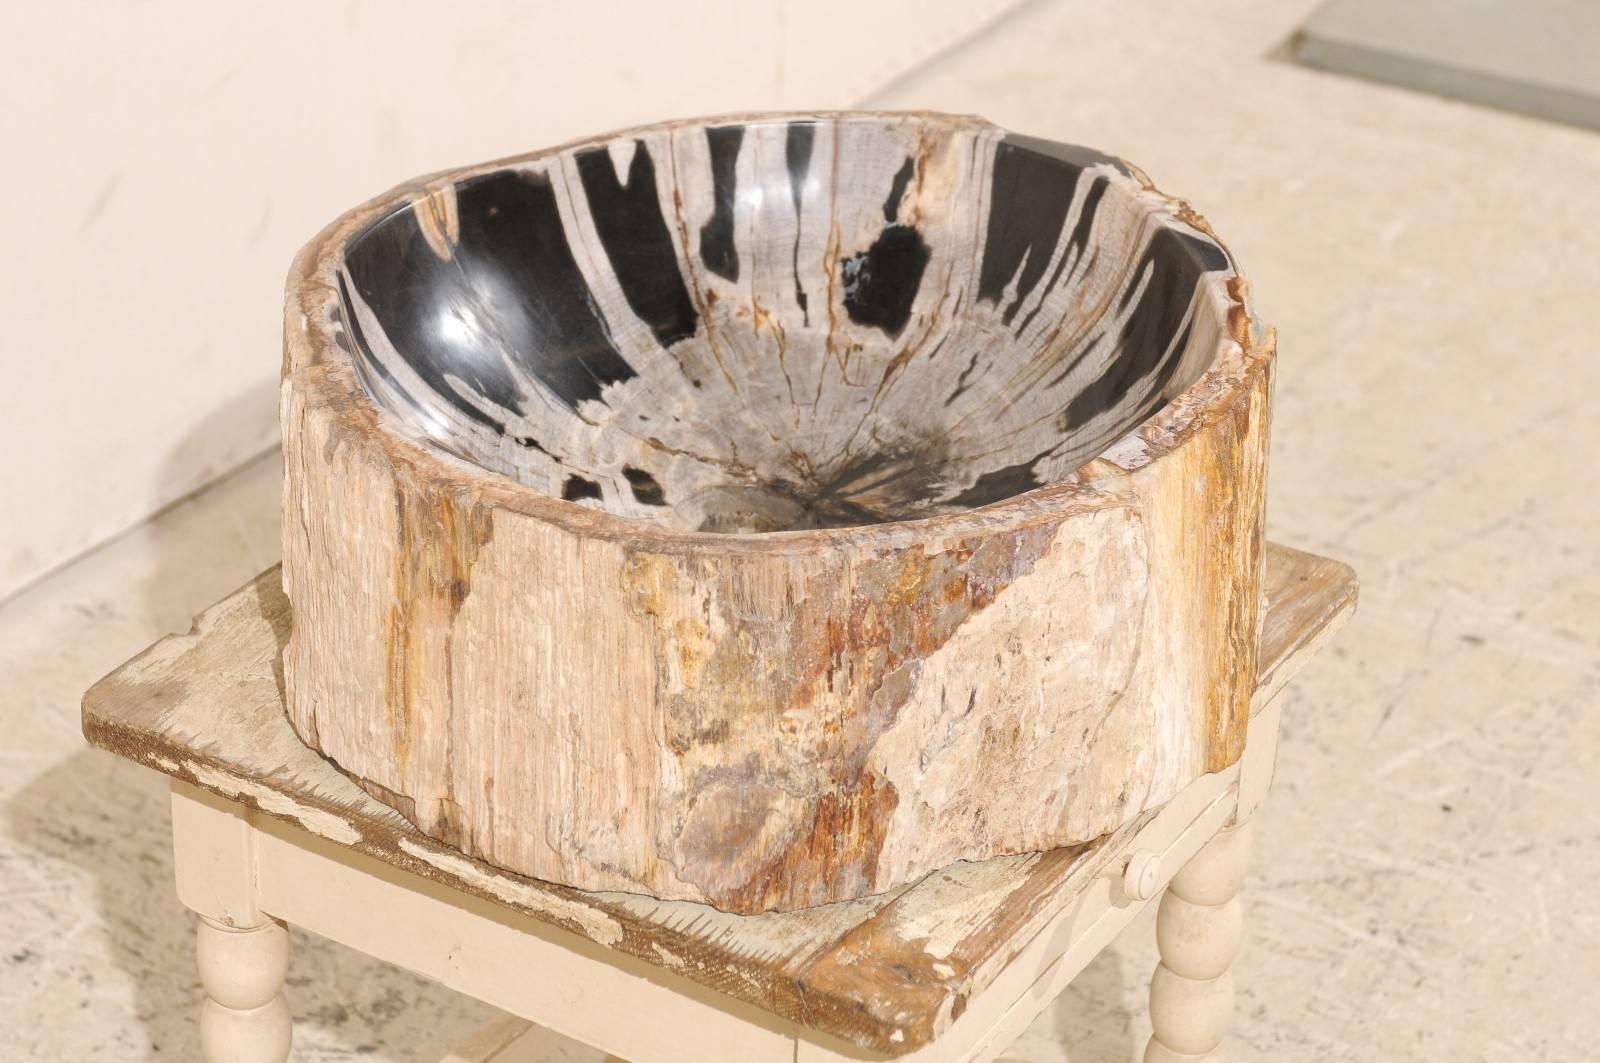 Indonesian Black and Cream Colored Petrified Wood Sink Great for a Powder Room Vanity